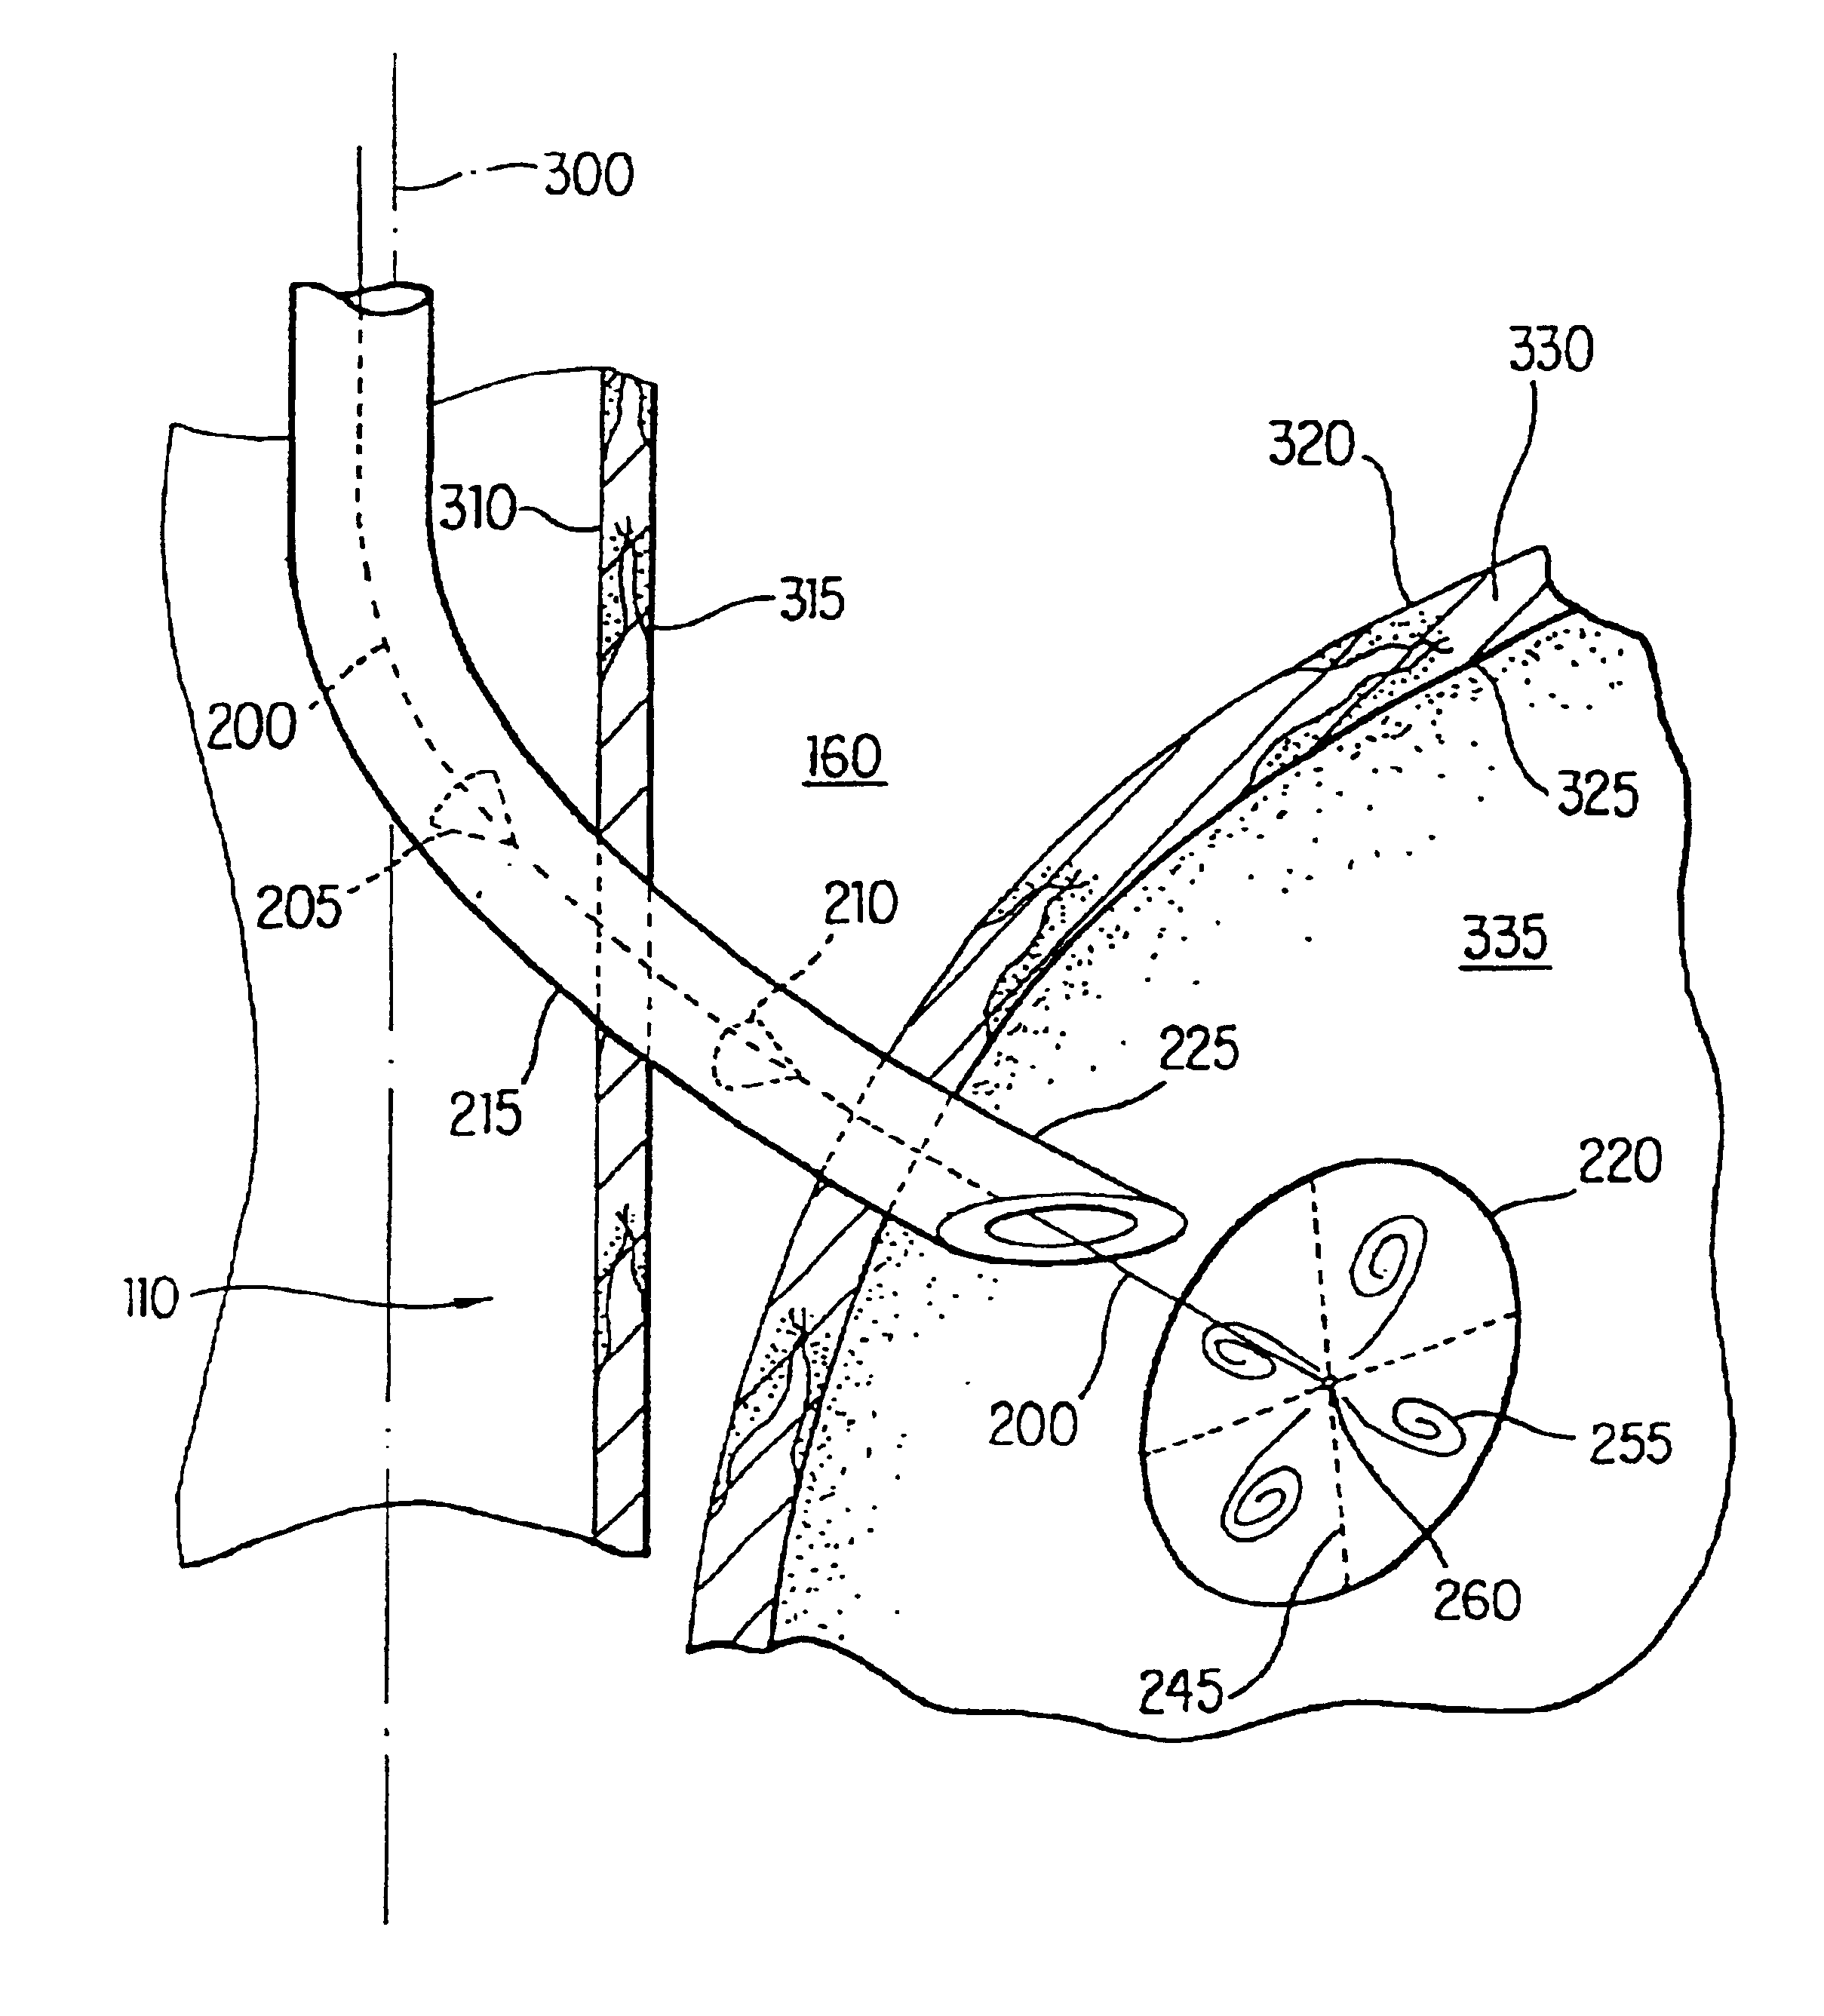 Method and apparatus for endoscopic repair of the lower esophageal sphincter